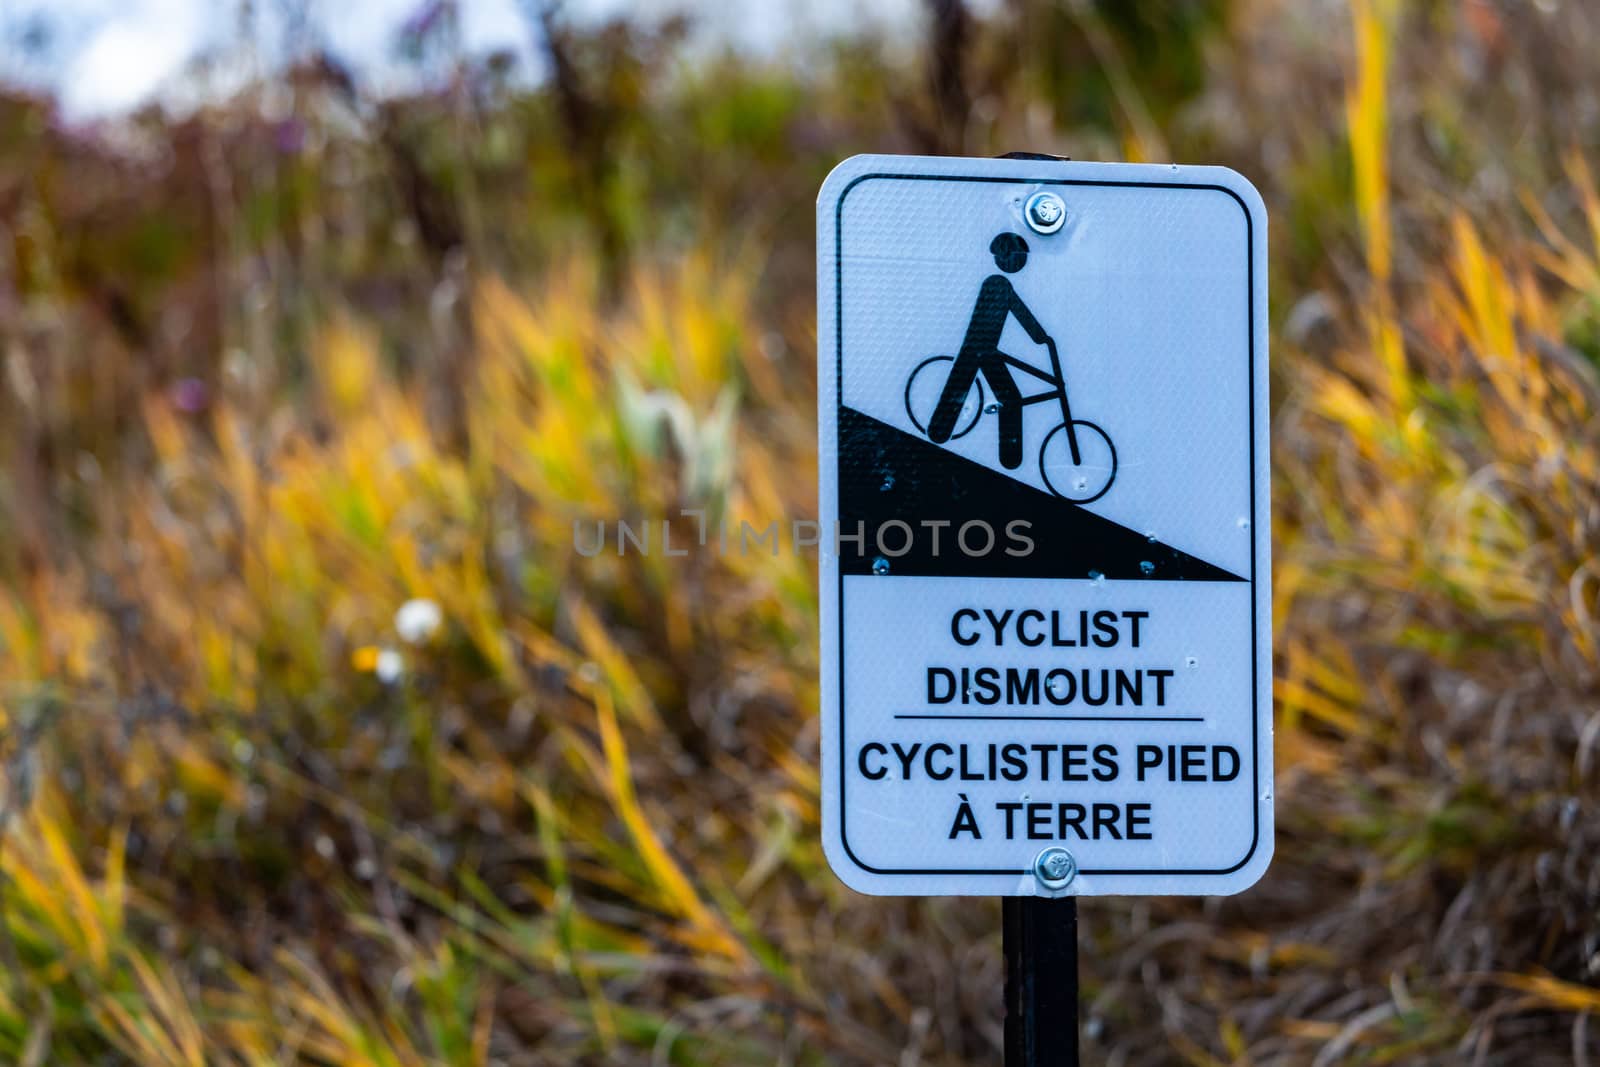 A bilingual sign on a suburban trail indicates that cyclists should dismount their bicycles due to a steep hill along the path.